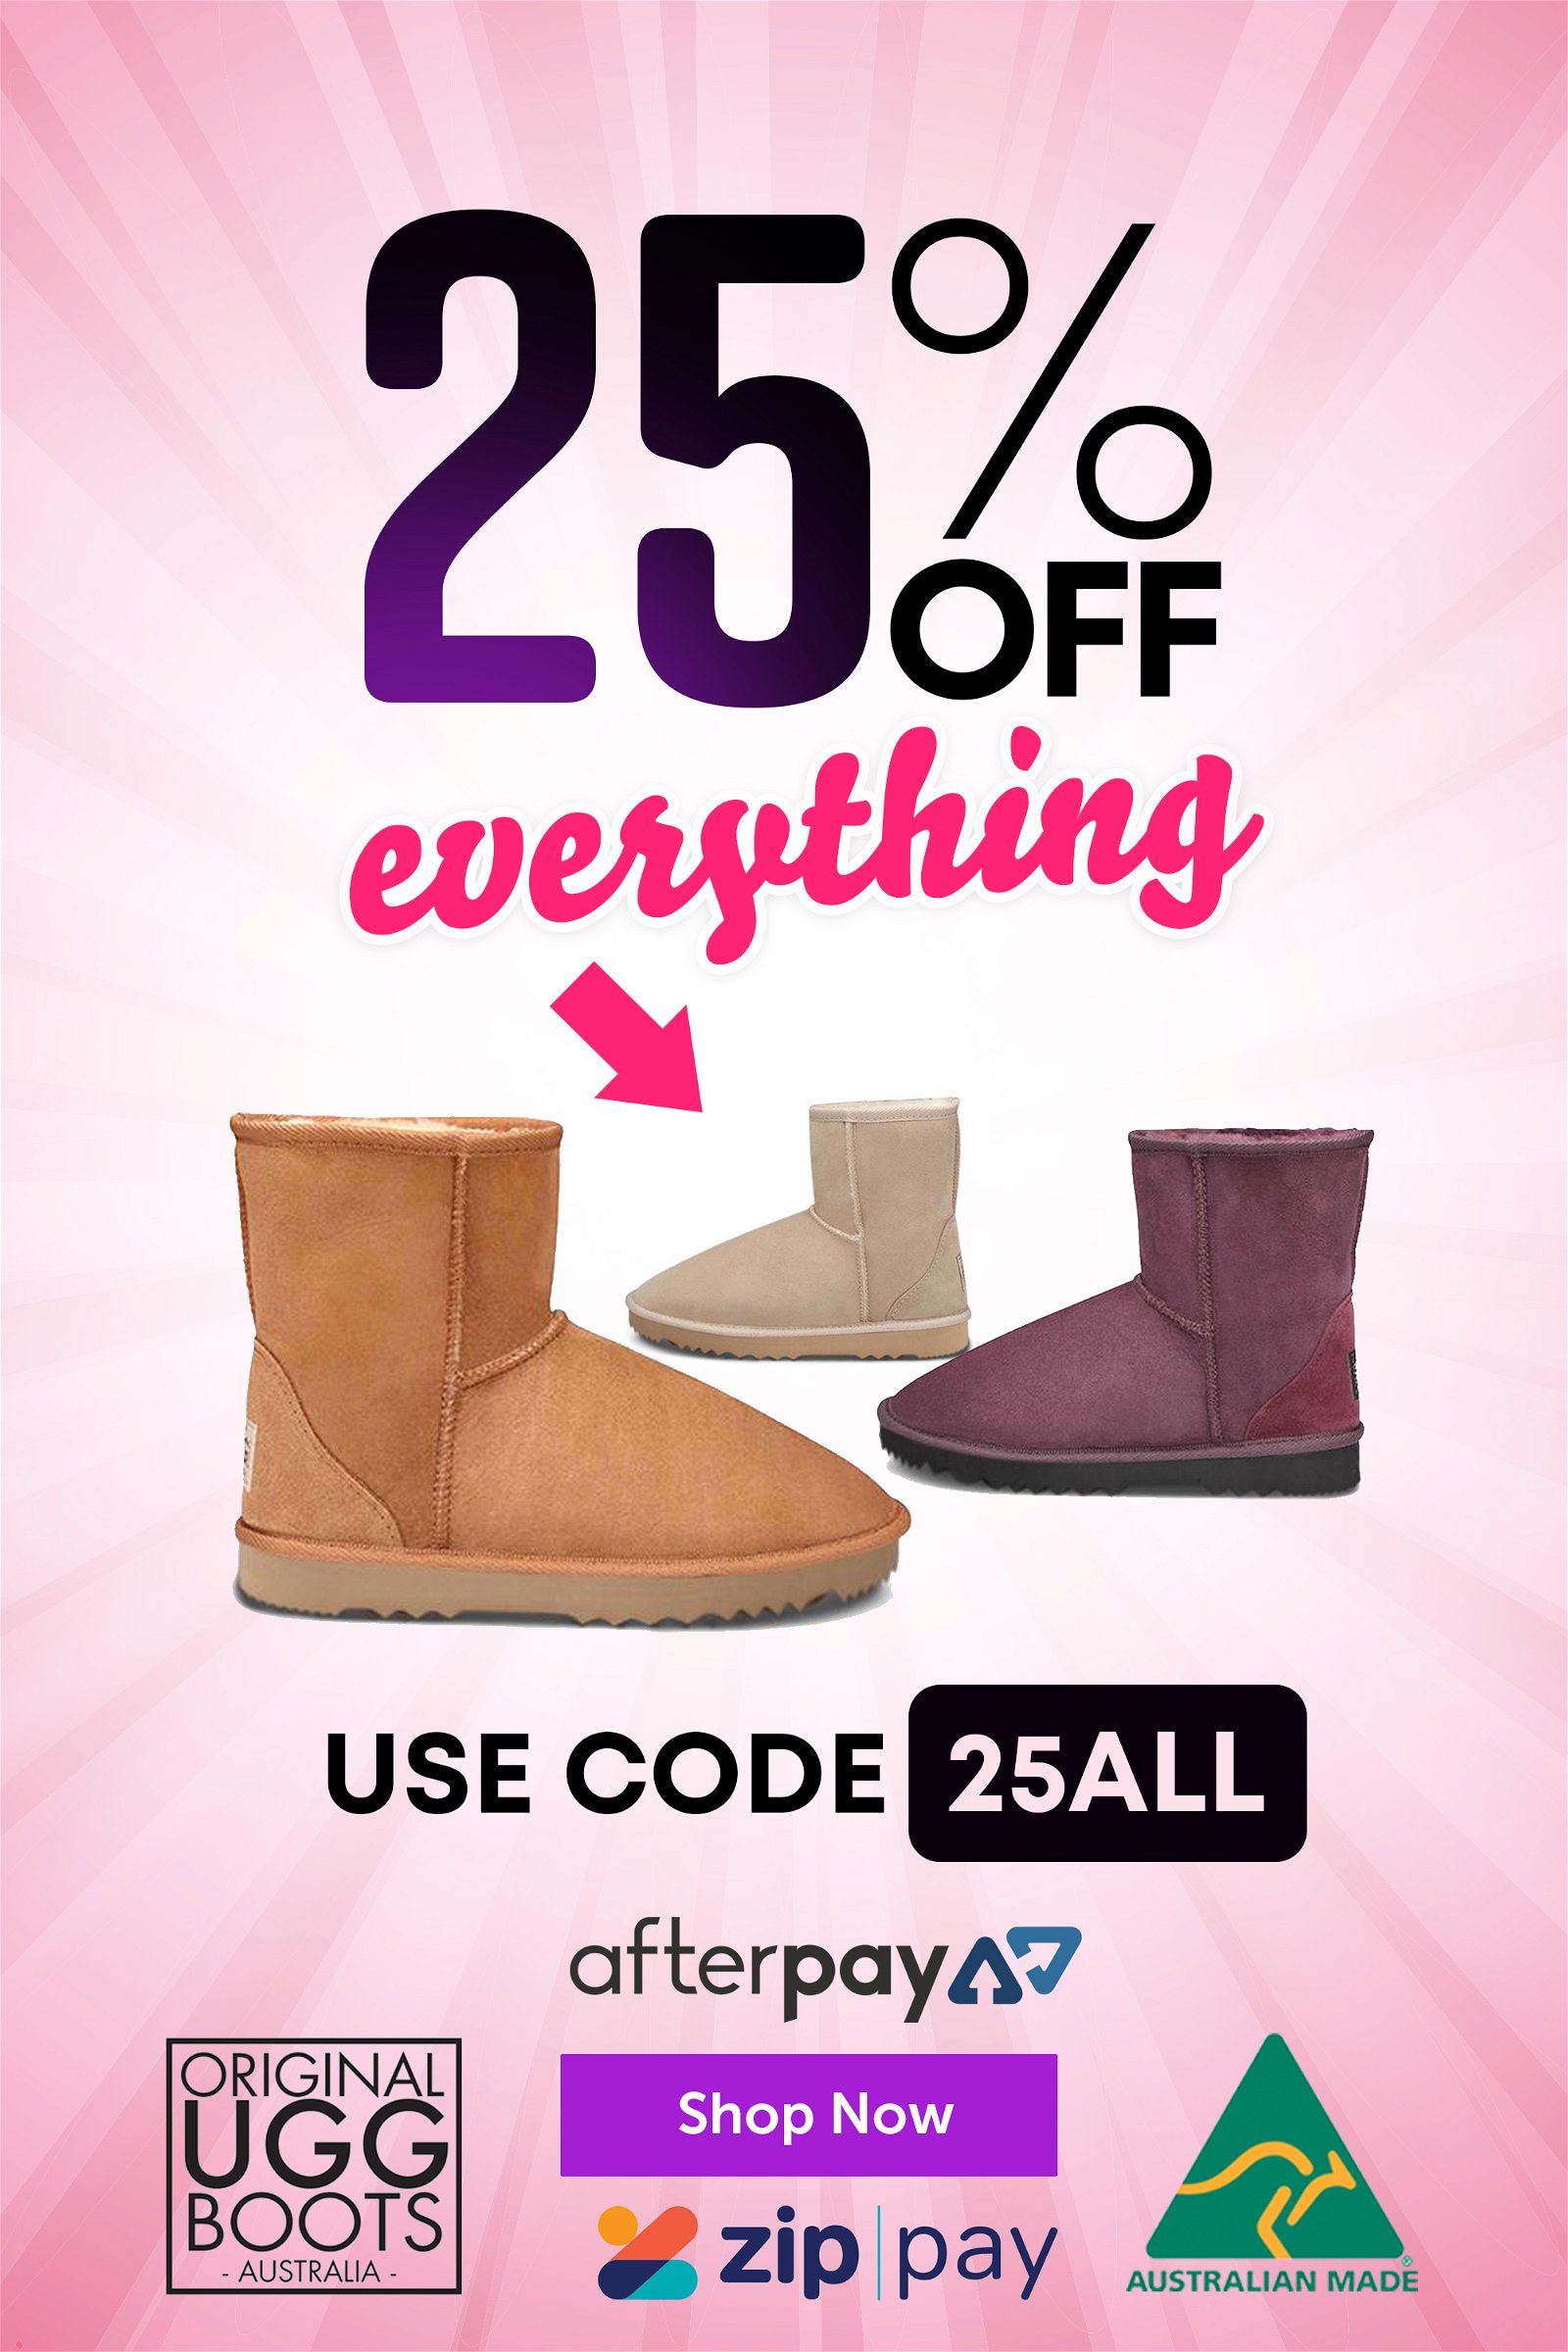 uggs at discount